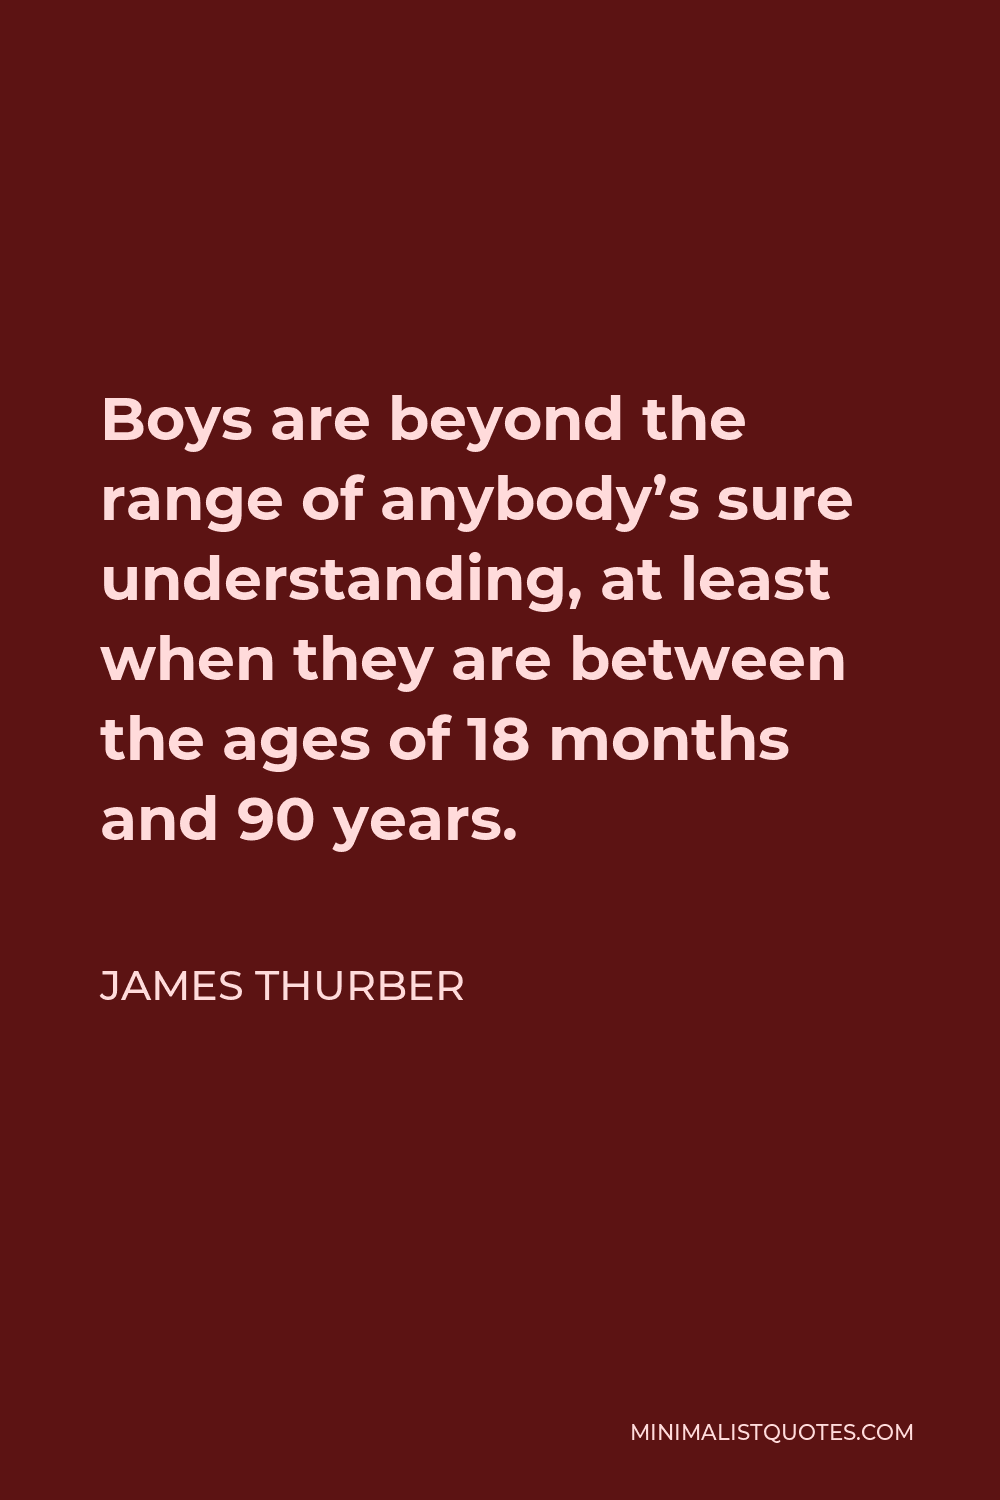 James Thurber Quote - Boys are beyond the range of anybody’s sure understanding, at least when they are between the ages of 18 months and 90 years.